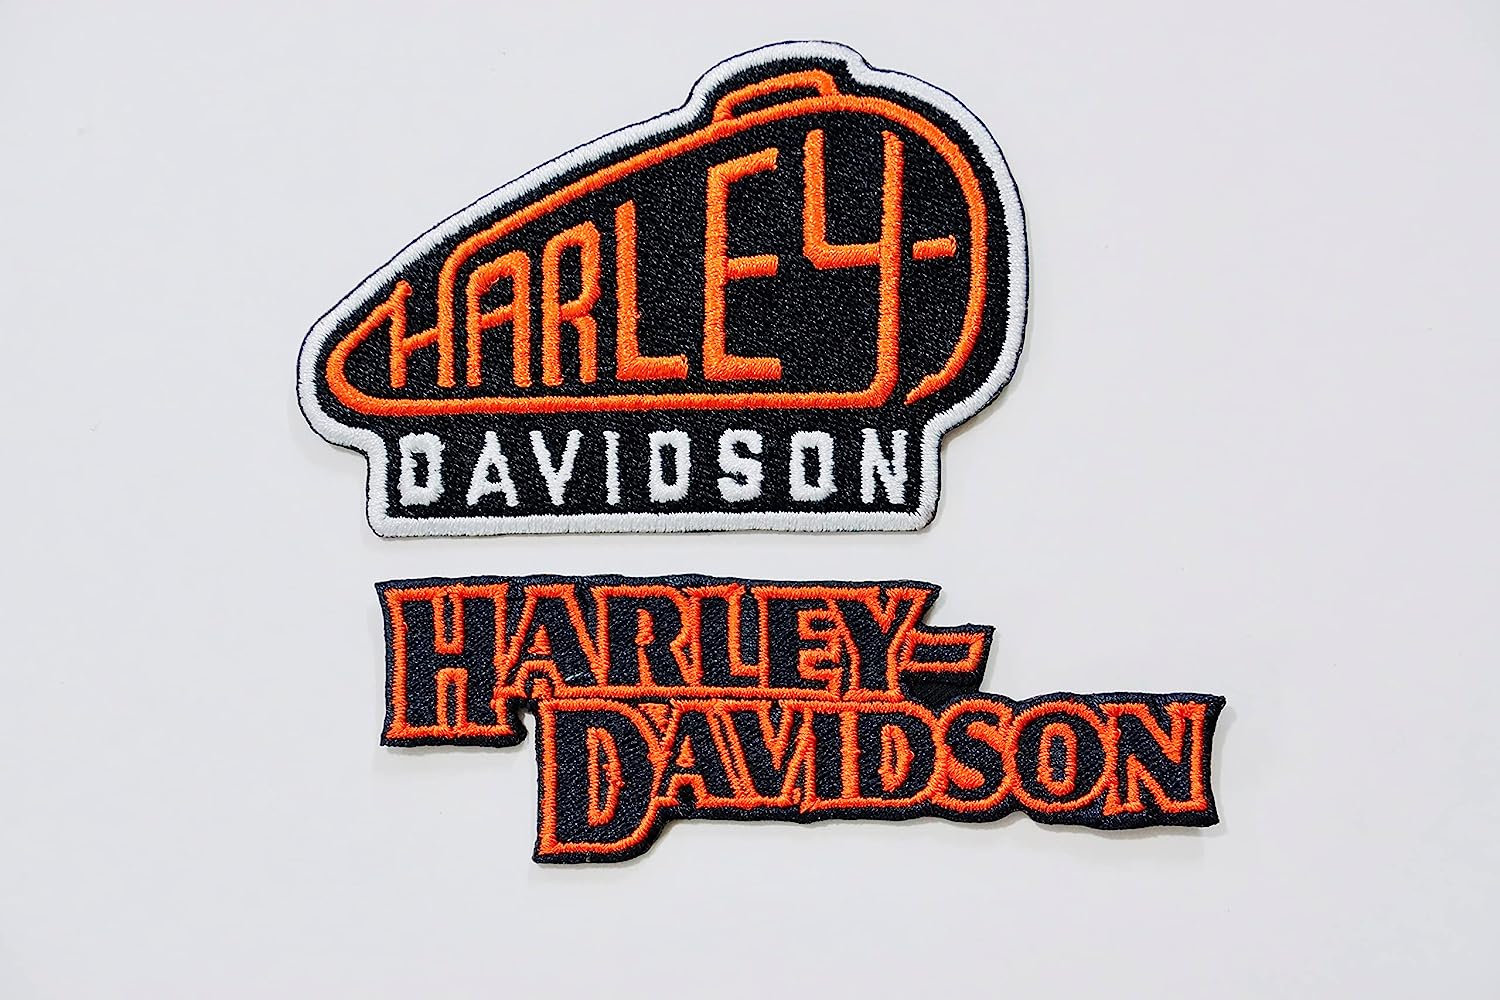 Harley-Davidson 10.25 in Embroidery Brown Eagle Bar & Shield Emblem Sew-On  Patch